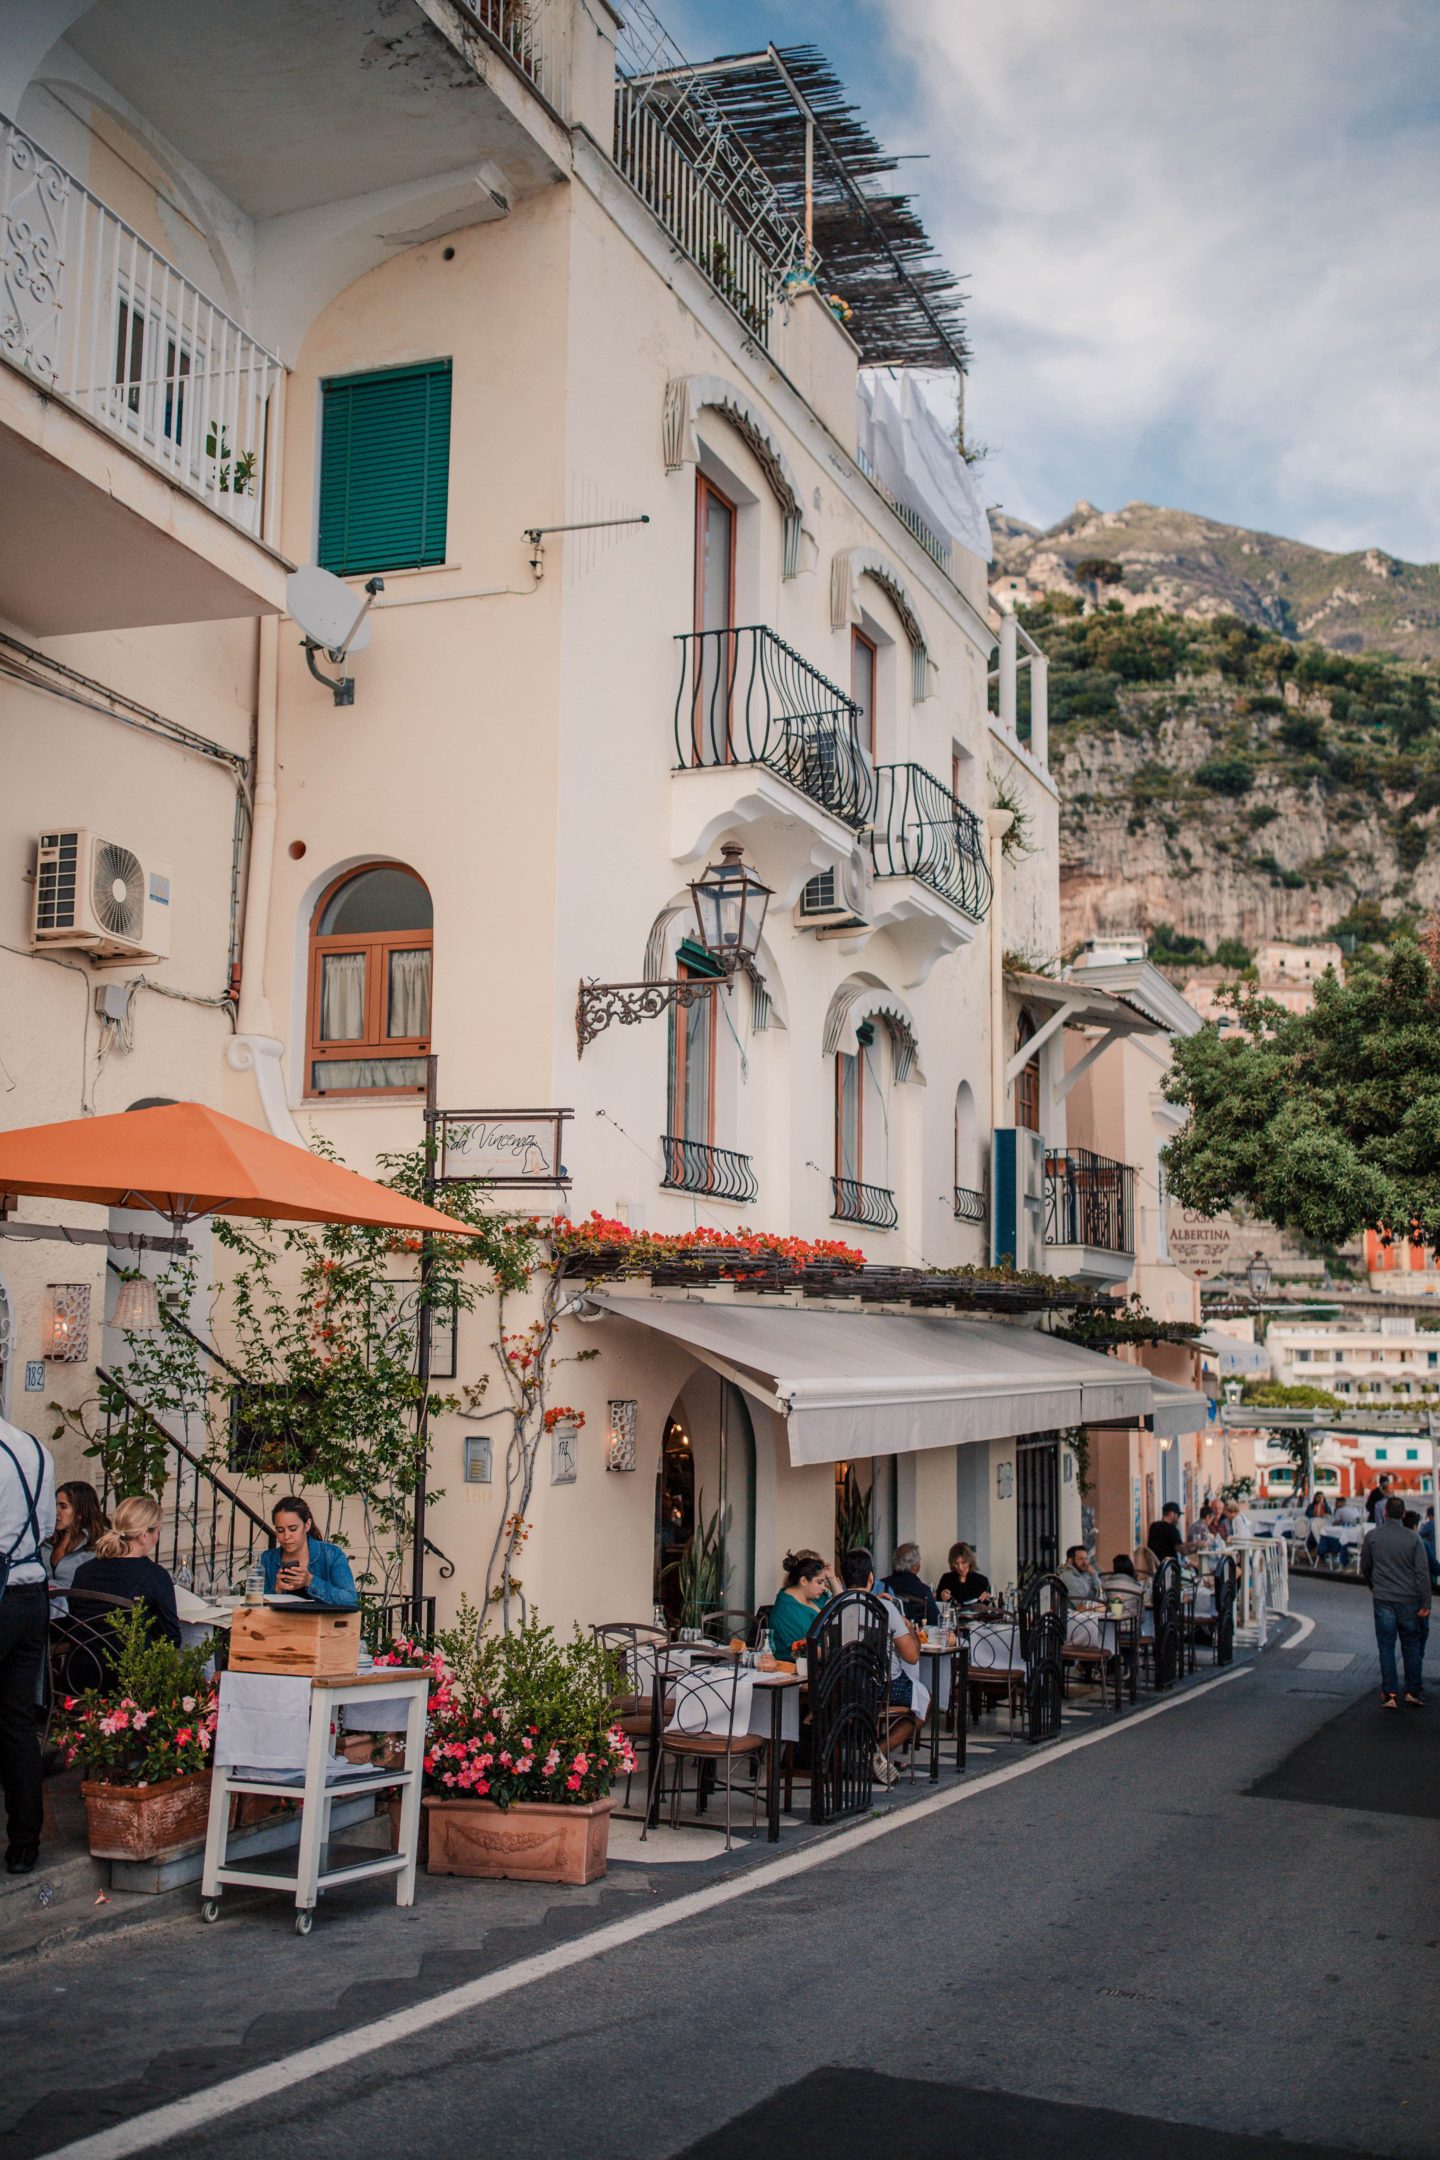 Can you travel to Positano Italy on a Budget? | How expensive is the Amalfi Coast - Dana Berez Positano Travel Guide 2019